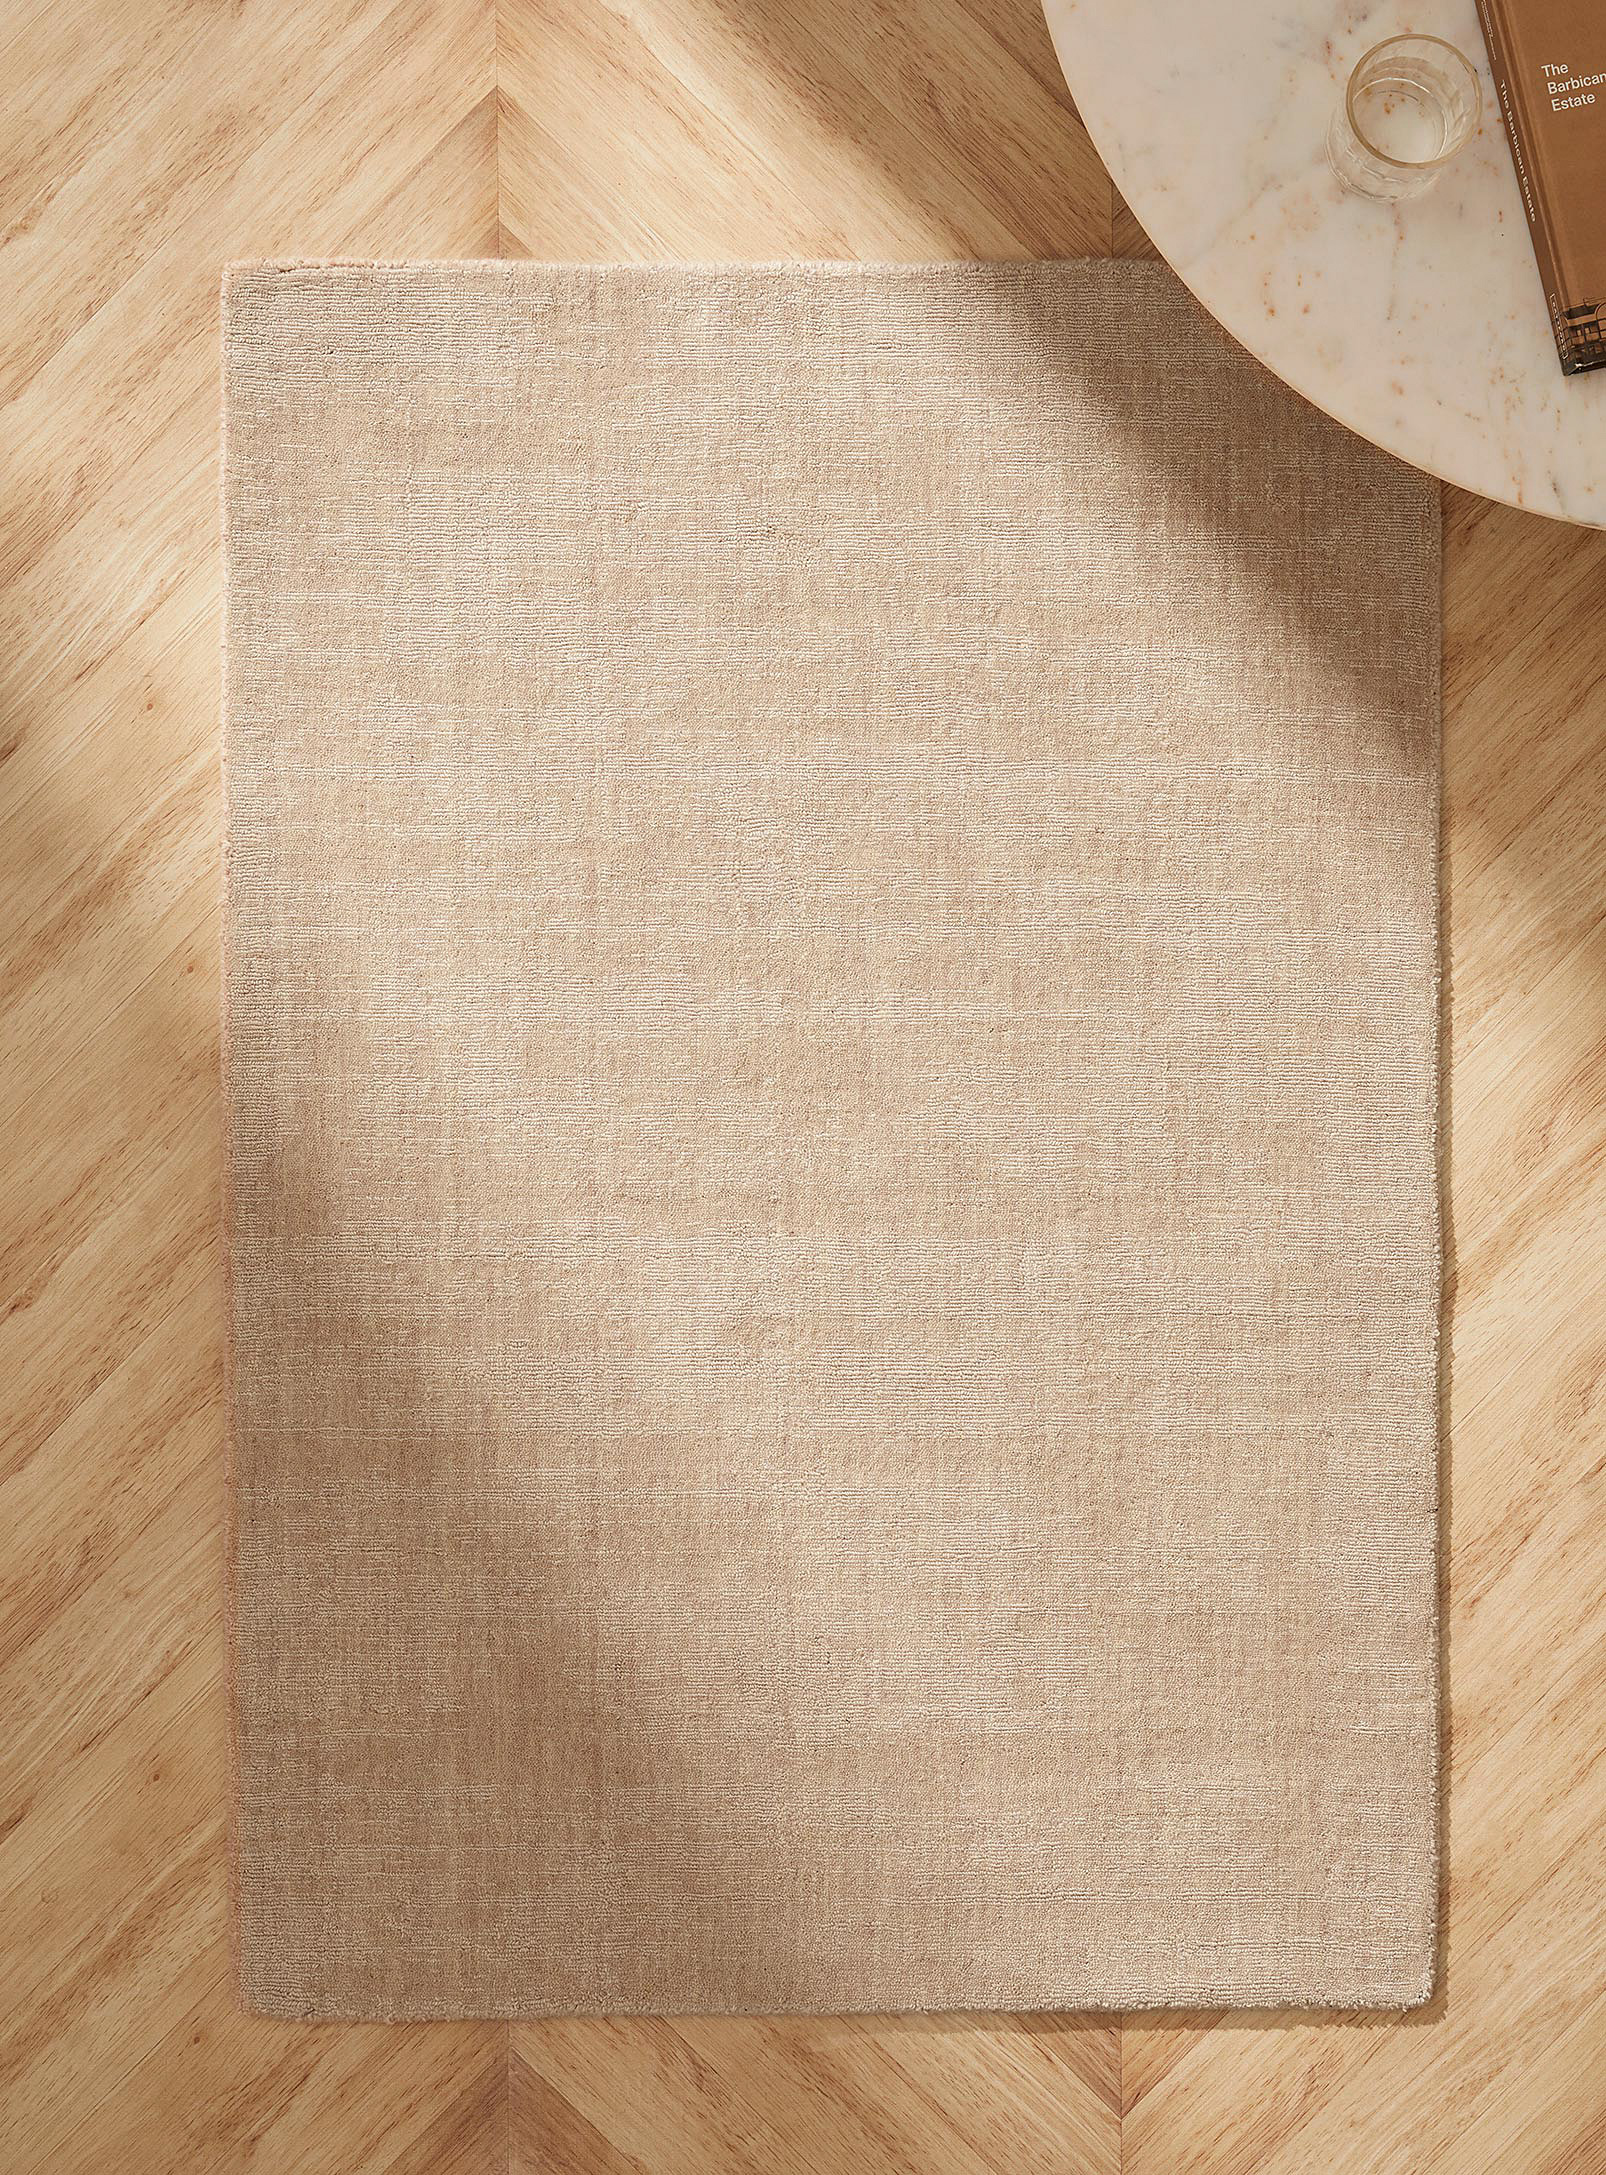 Simons Maison Small Heathered Wool Artisanal Rug See Available Sizes